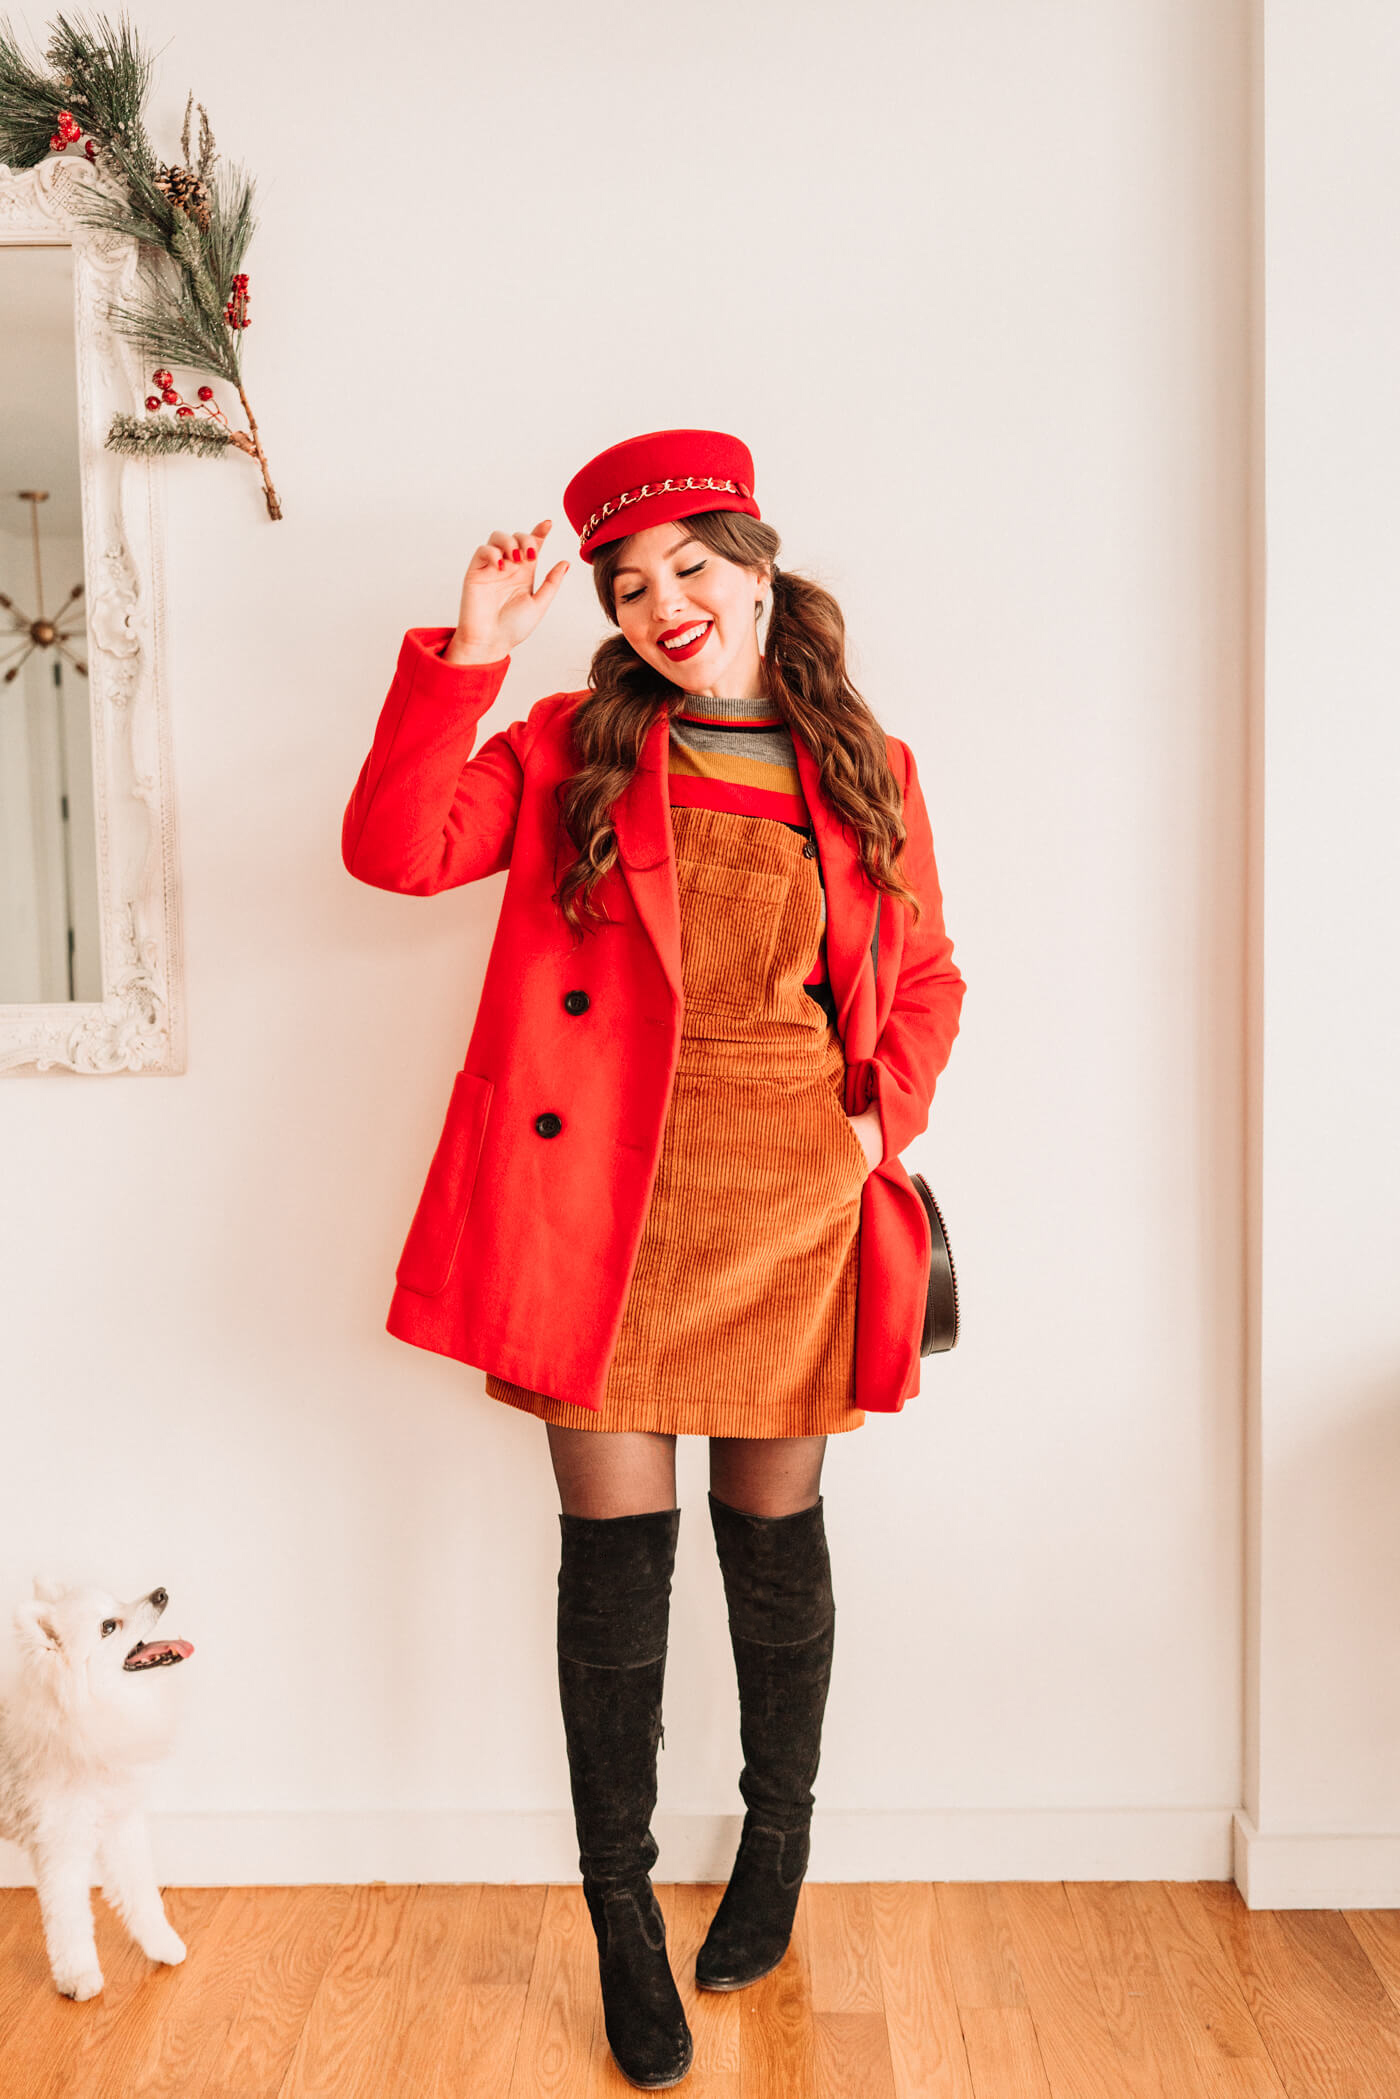 4 ways to style a corduroy overall dress